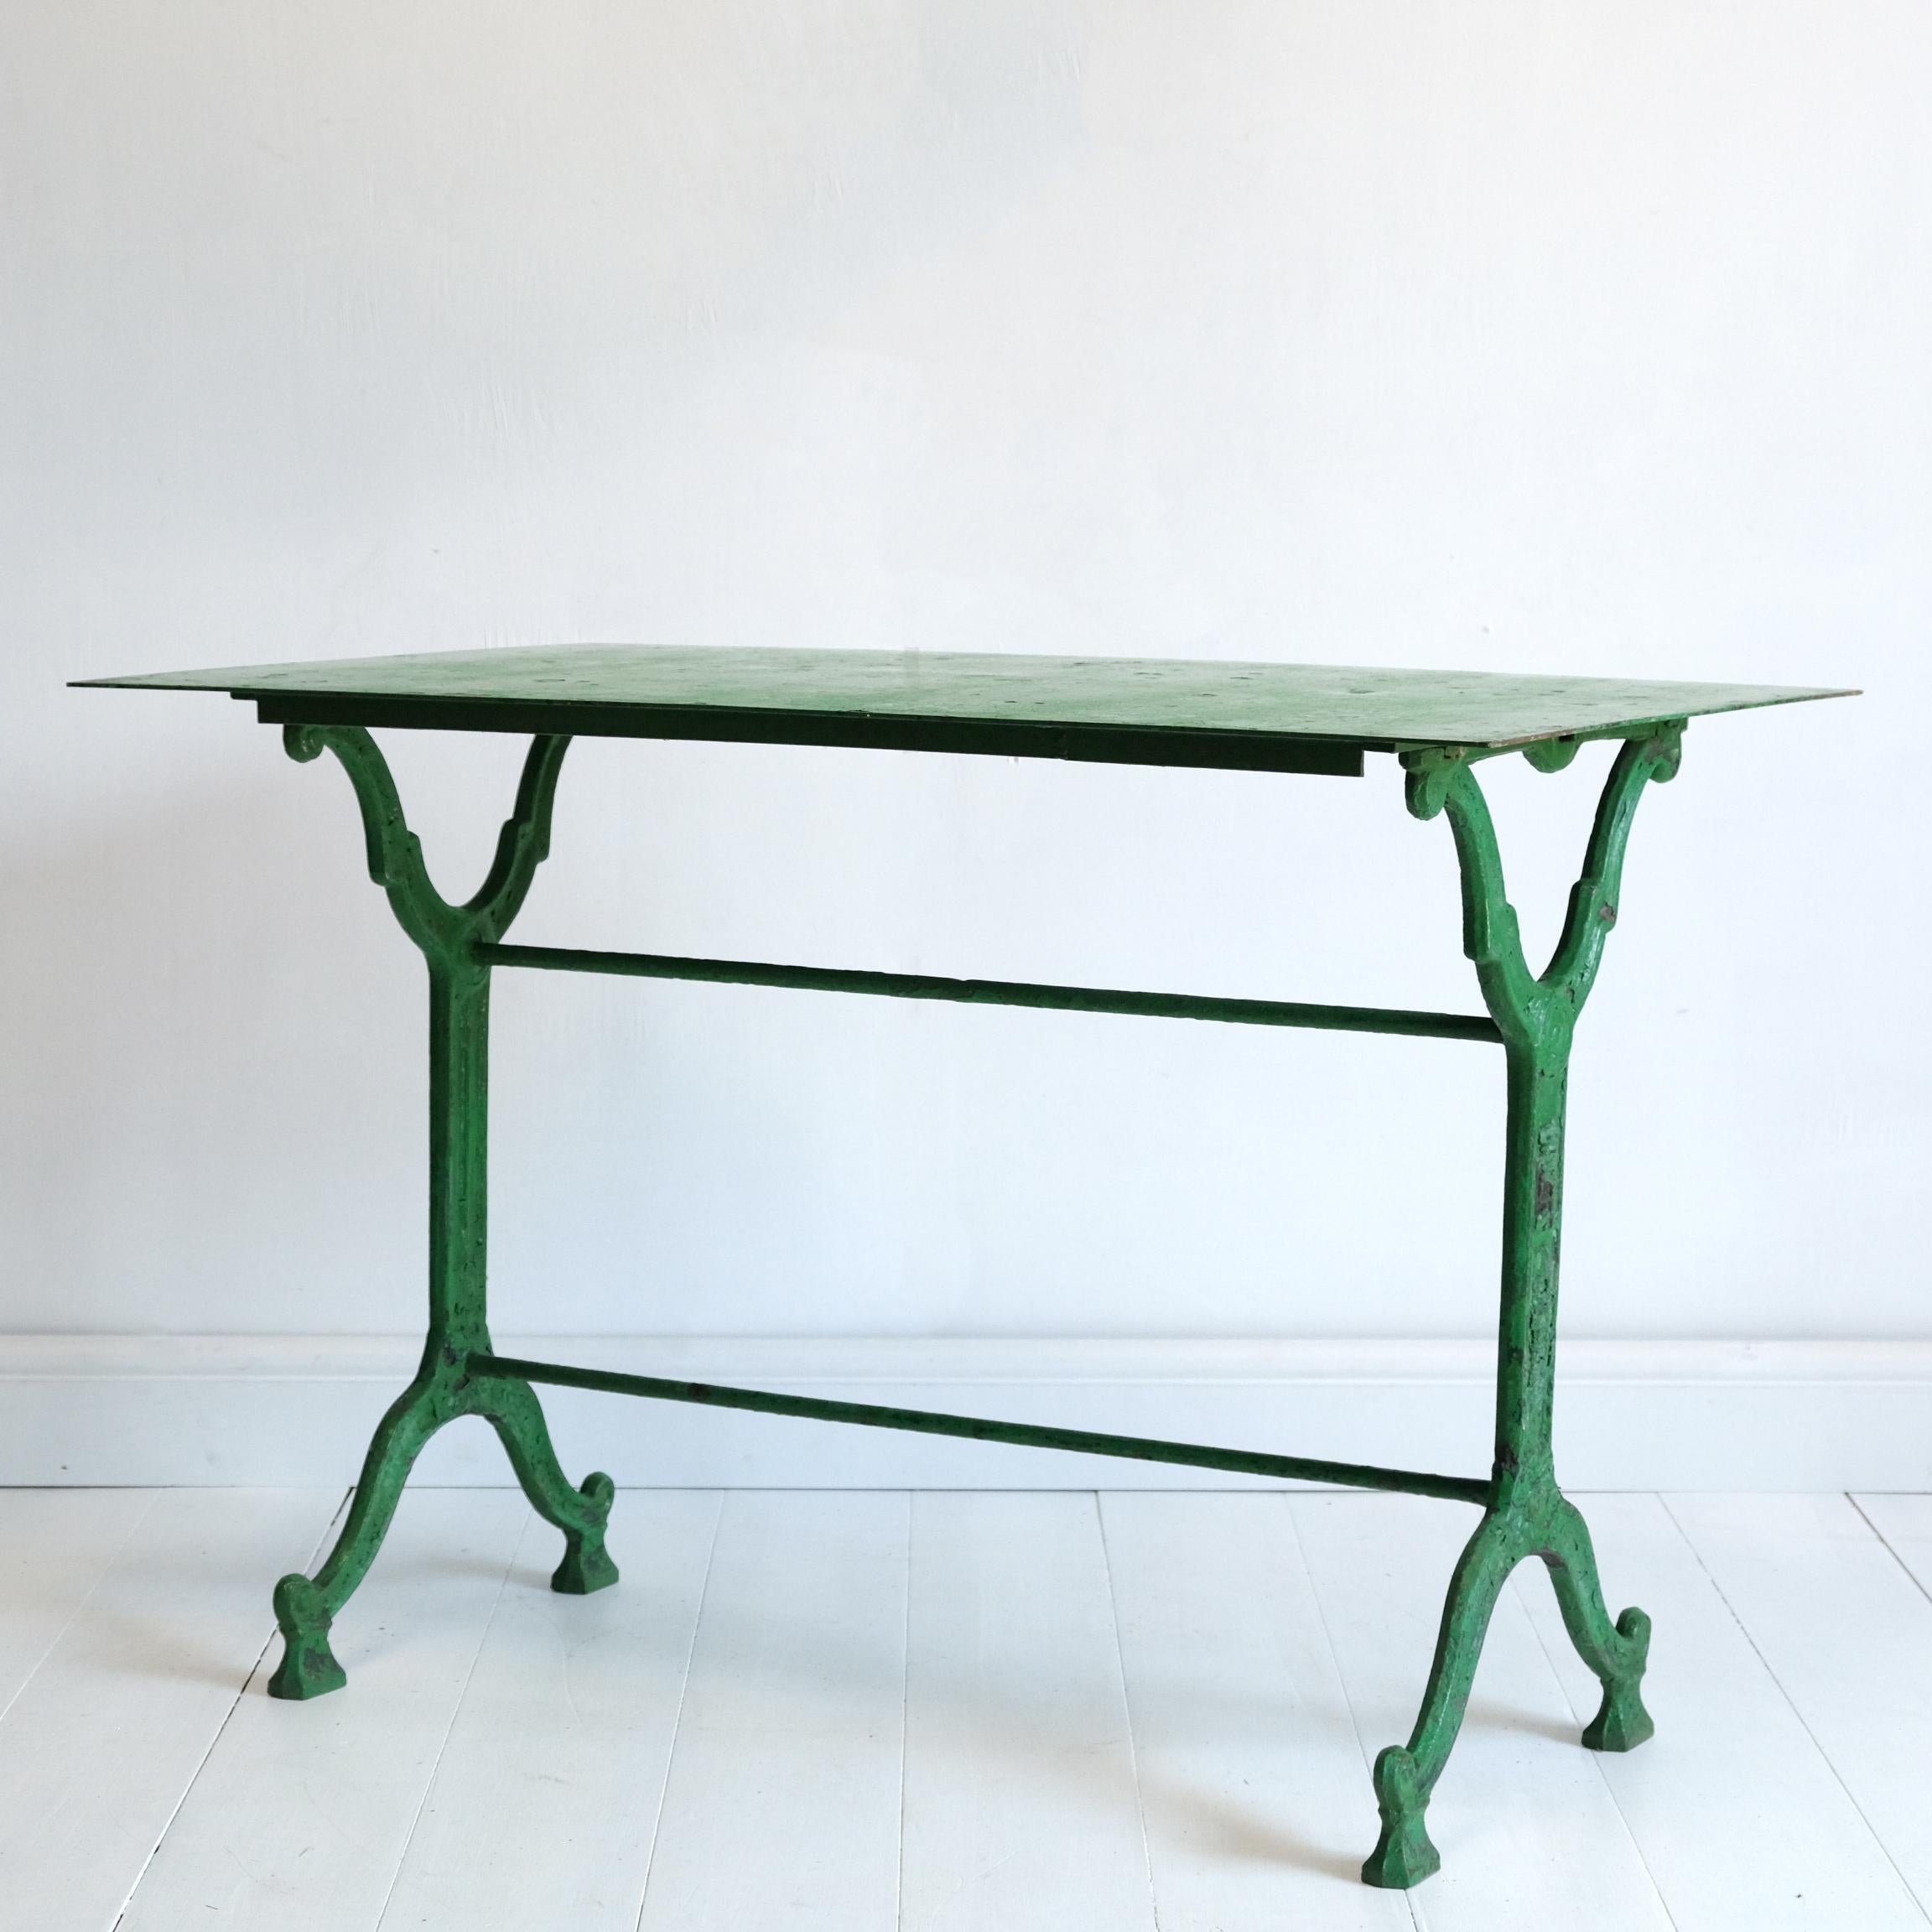 A very good quality French 19th century cast iron garden table by Groeff of Toulon. Layers of old paint with the most prominent being a striking but very tasteful green. Two very well-cast decorative trestle type supports united by twin rod